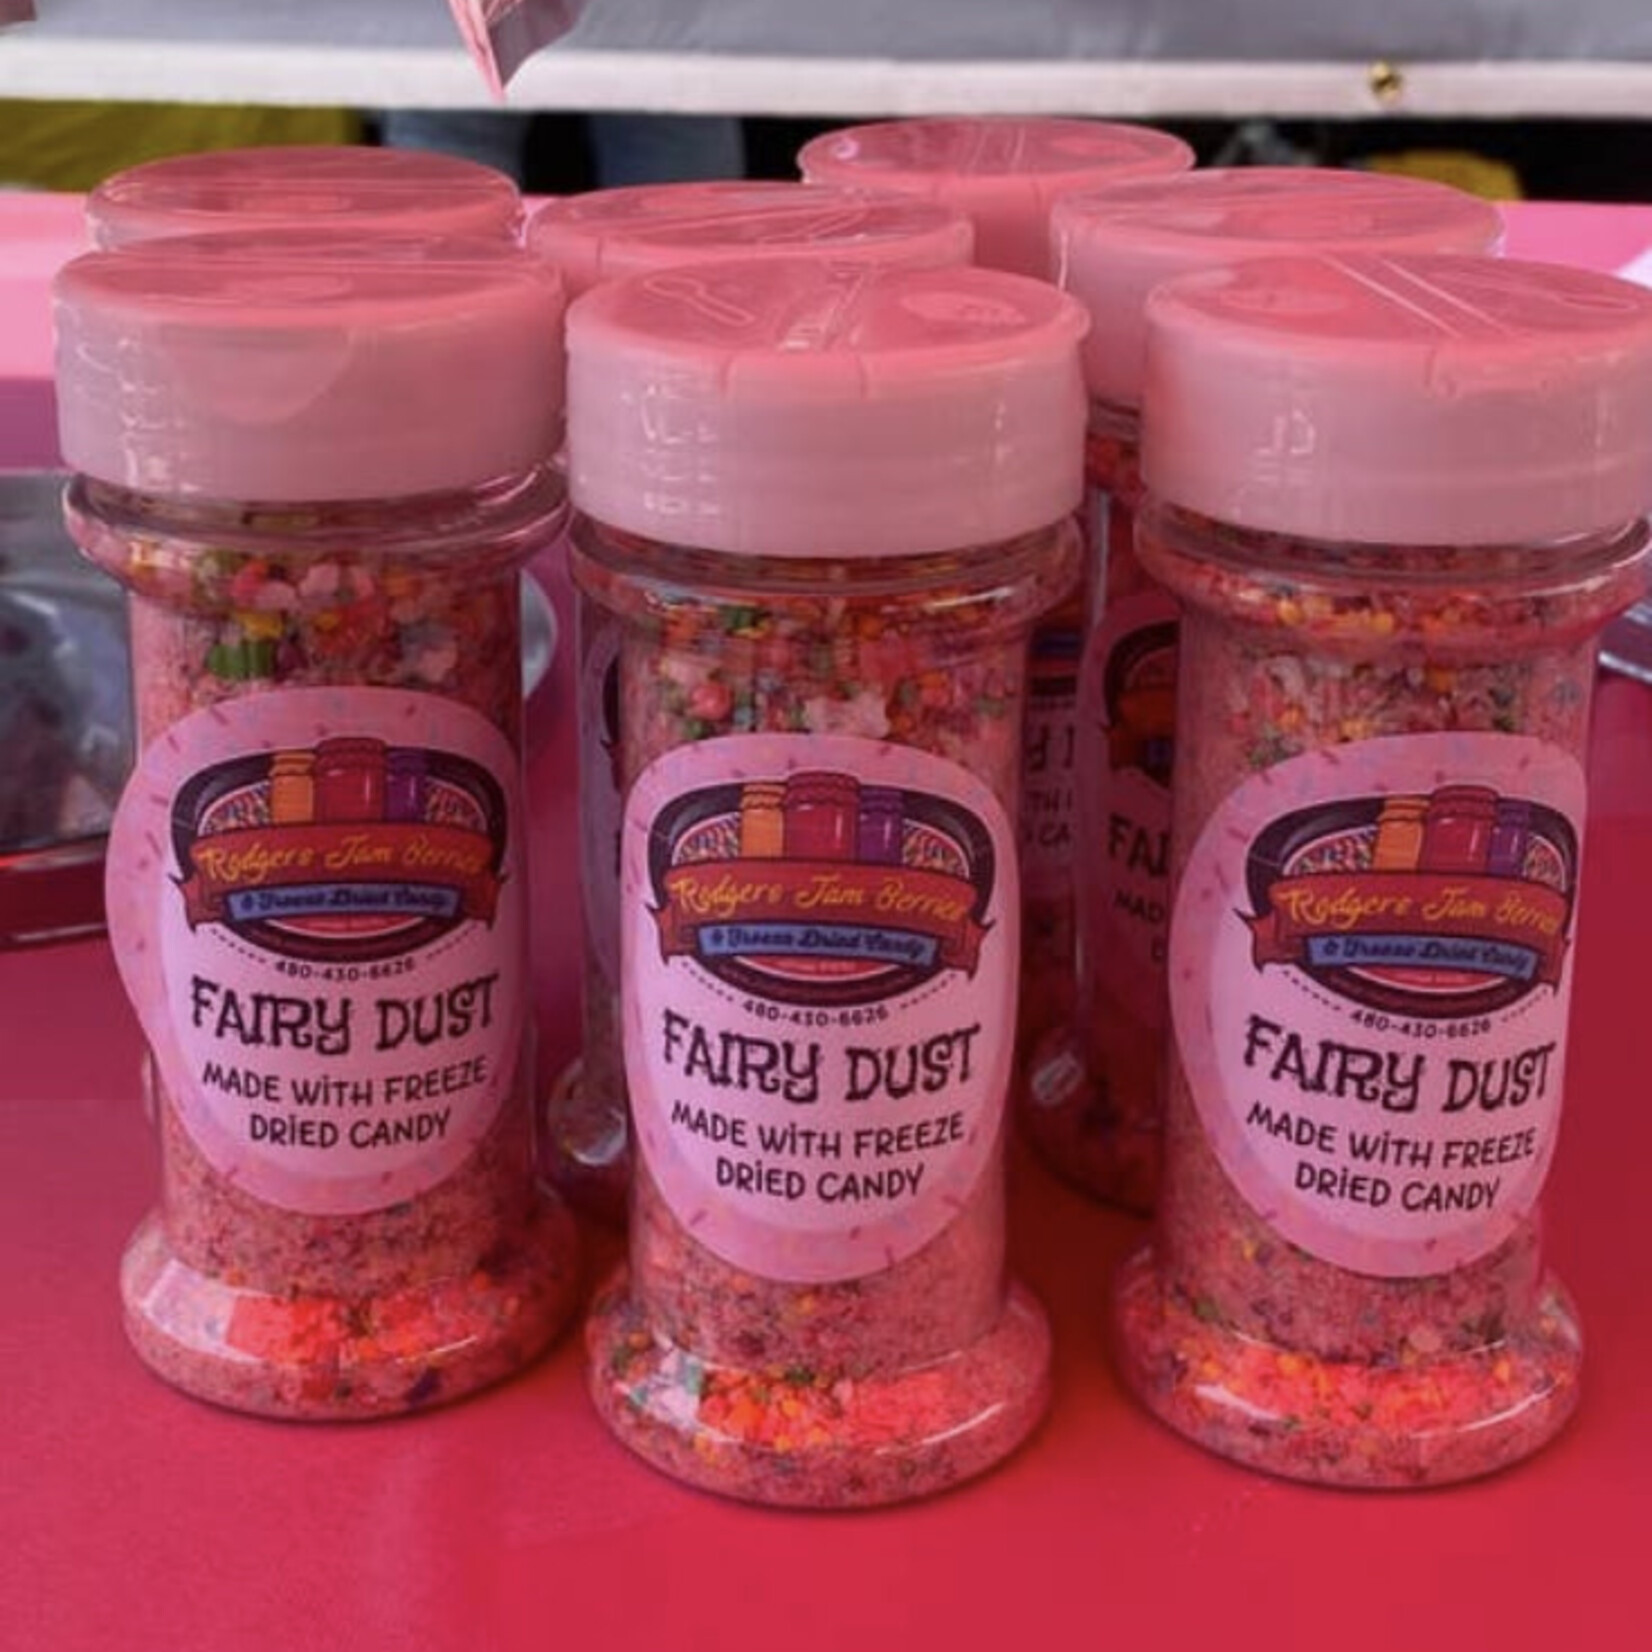 Rodgers Jam Berries Freeze Dried Fairy Dust